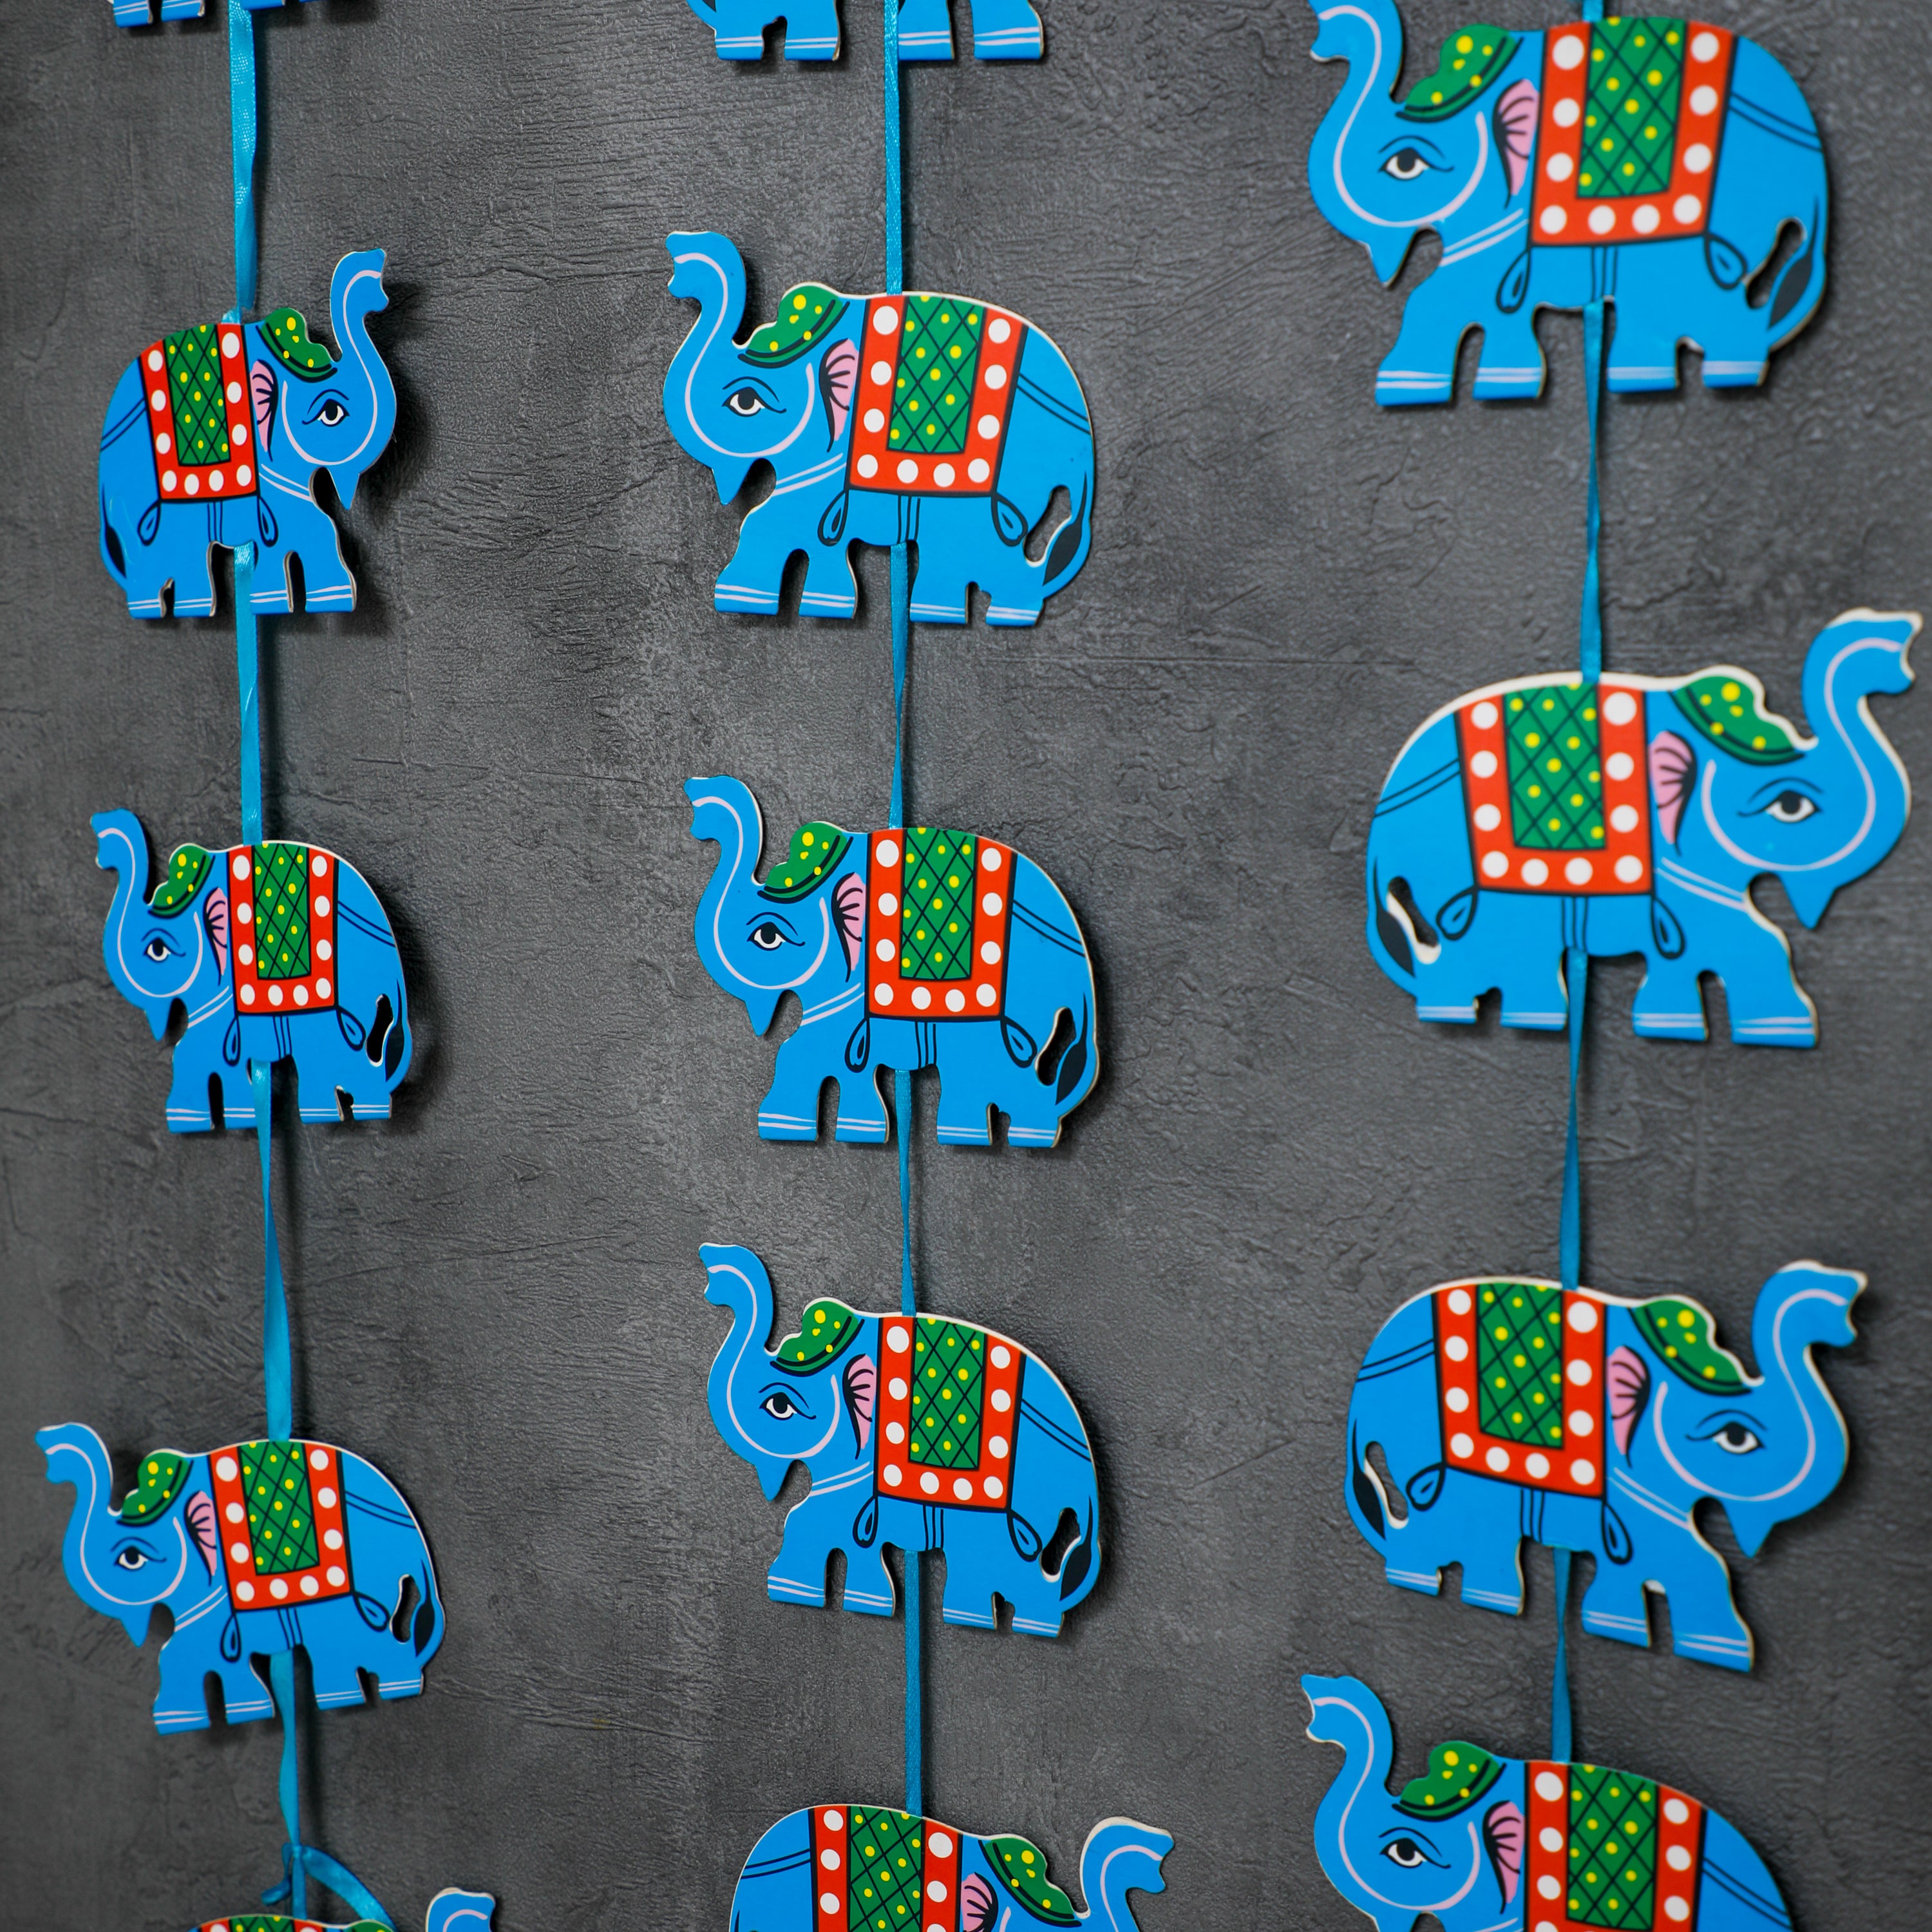 The elephants are then evenly spaced along the string, creating a visually appealing and cohesive garland.